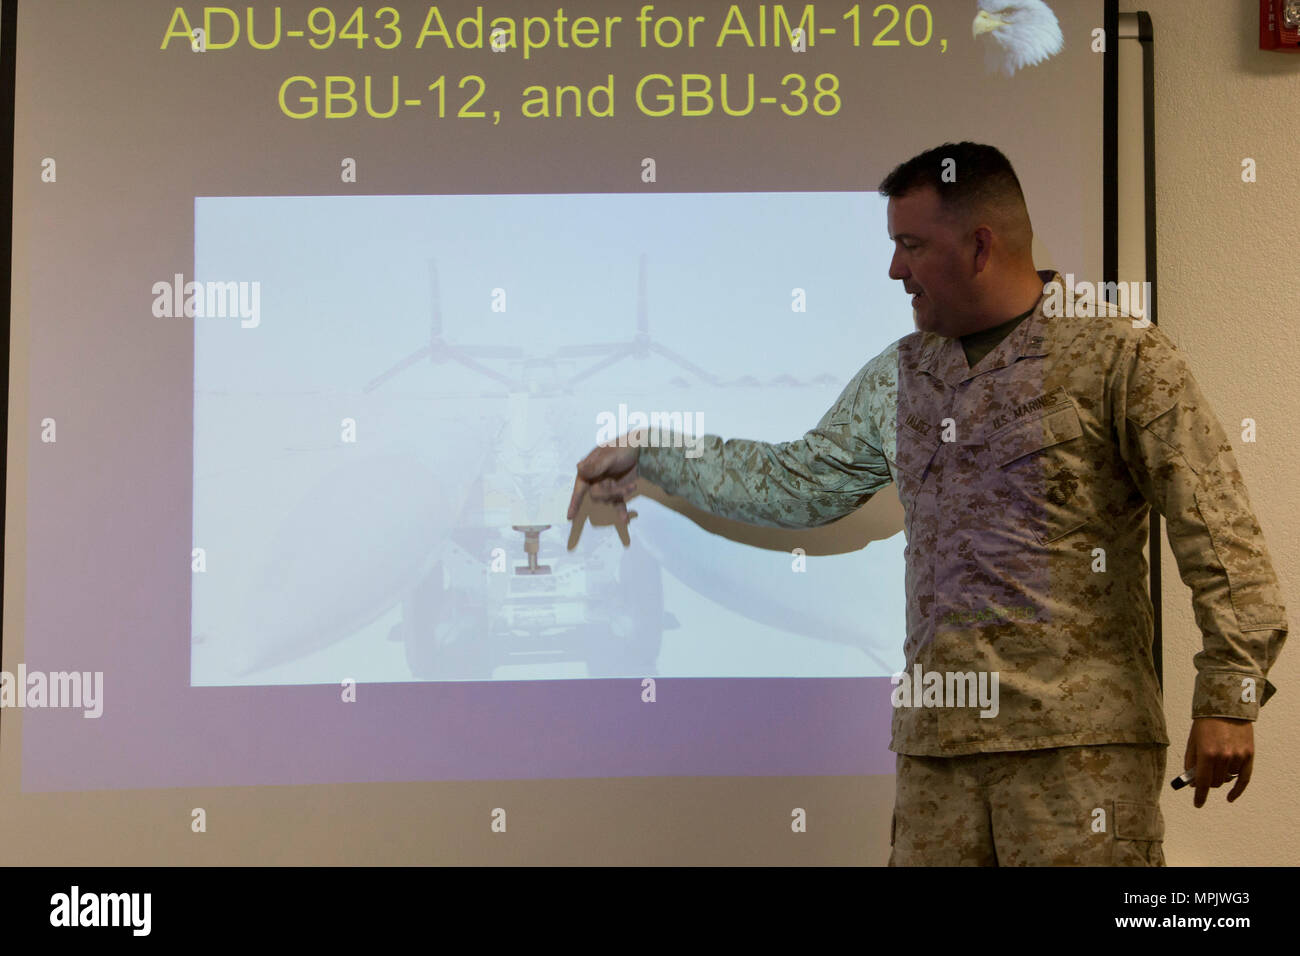 U.S. Marine Corps Capt. John P. Valdez, ordnance officer with Marine Aviation Weapons and Tactics Squadron One (MAWTS-1) gives a period of instruction on expeditionary ordnance during the first ever Aircraft Maintenance Officer Course (AAMOC) at Marine Corps Air Station Yuma, Ariz., March 17, 2017. AAMOC will empower Aircraft Maintenance Officers with leadership tools, greater technical knowledge, and standardized practices through rigorous academics and hands on training in order to decrease ground related mishaps and increase sortie generation. (U.S. Marine Corps photo taken by Cpl. AaronJam Stock Photo